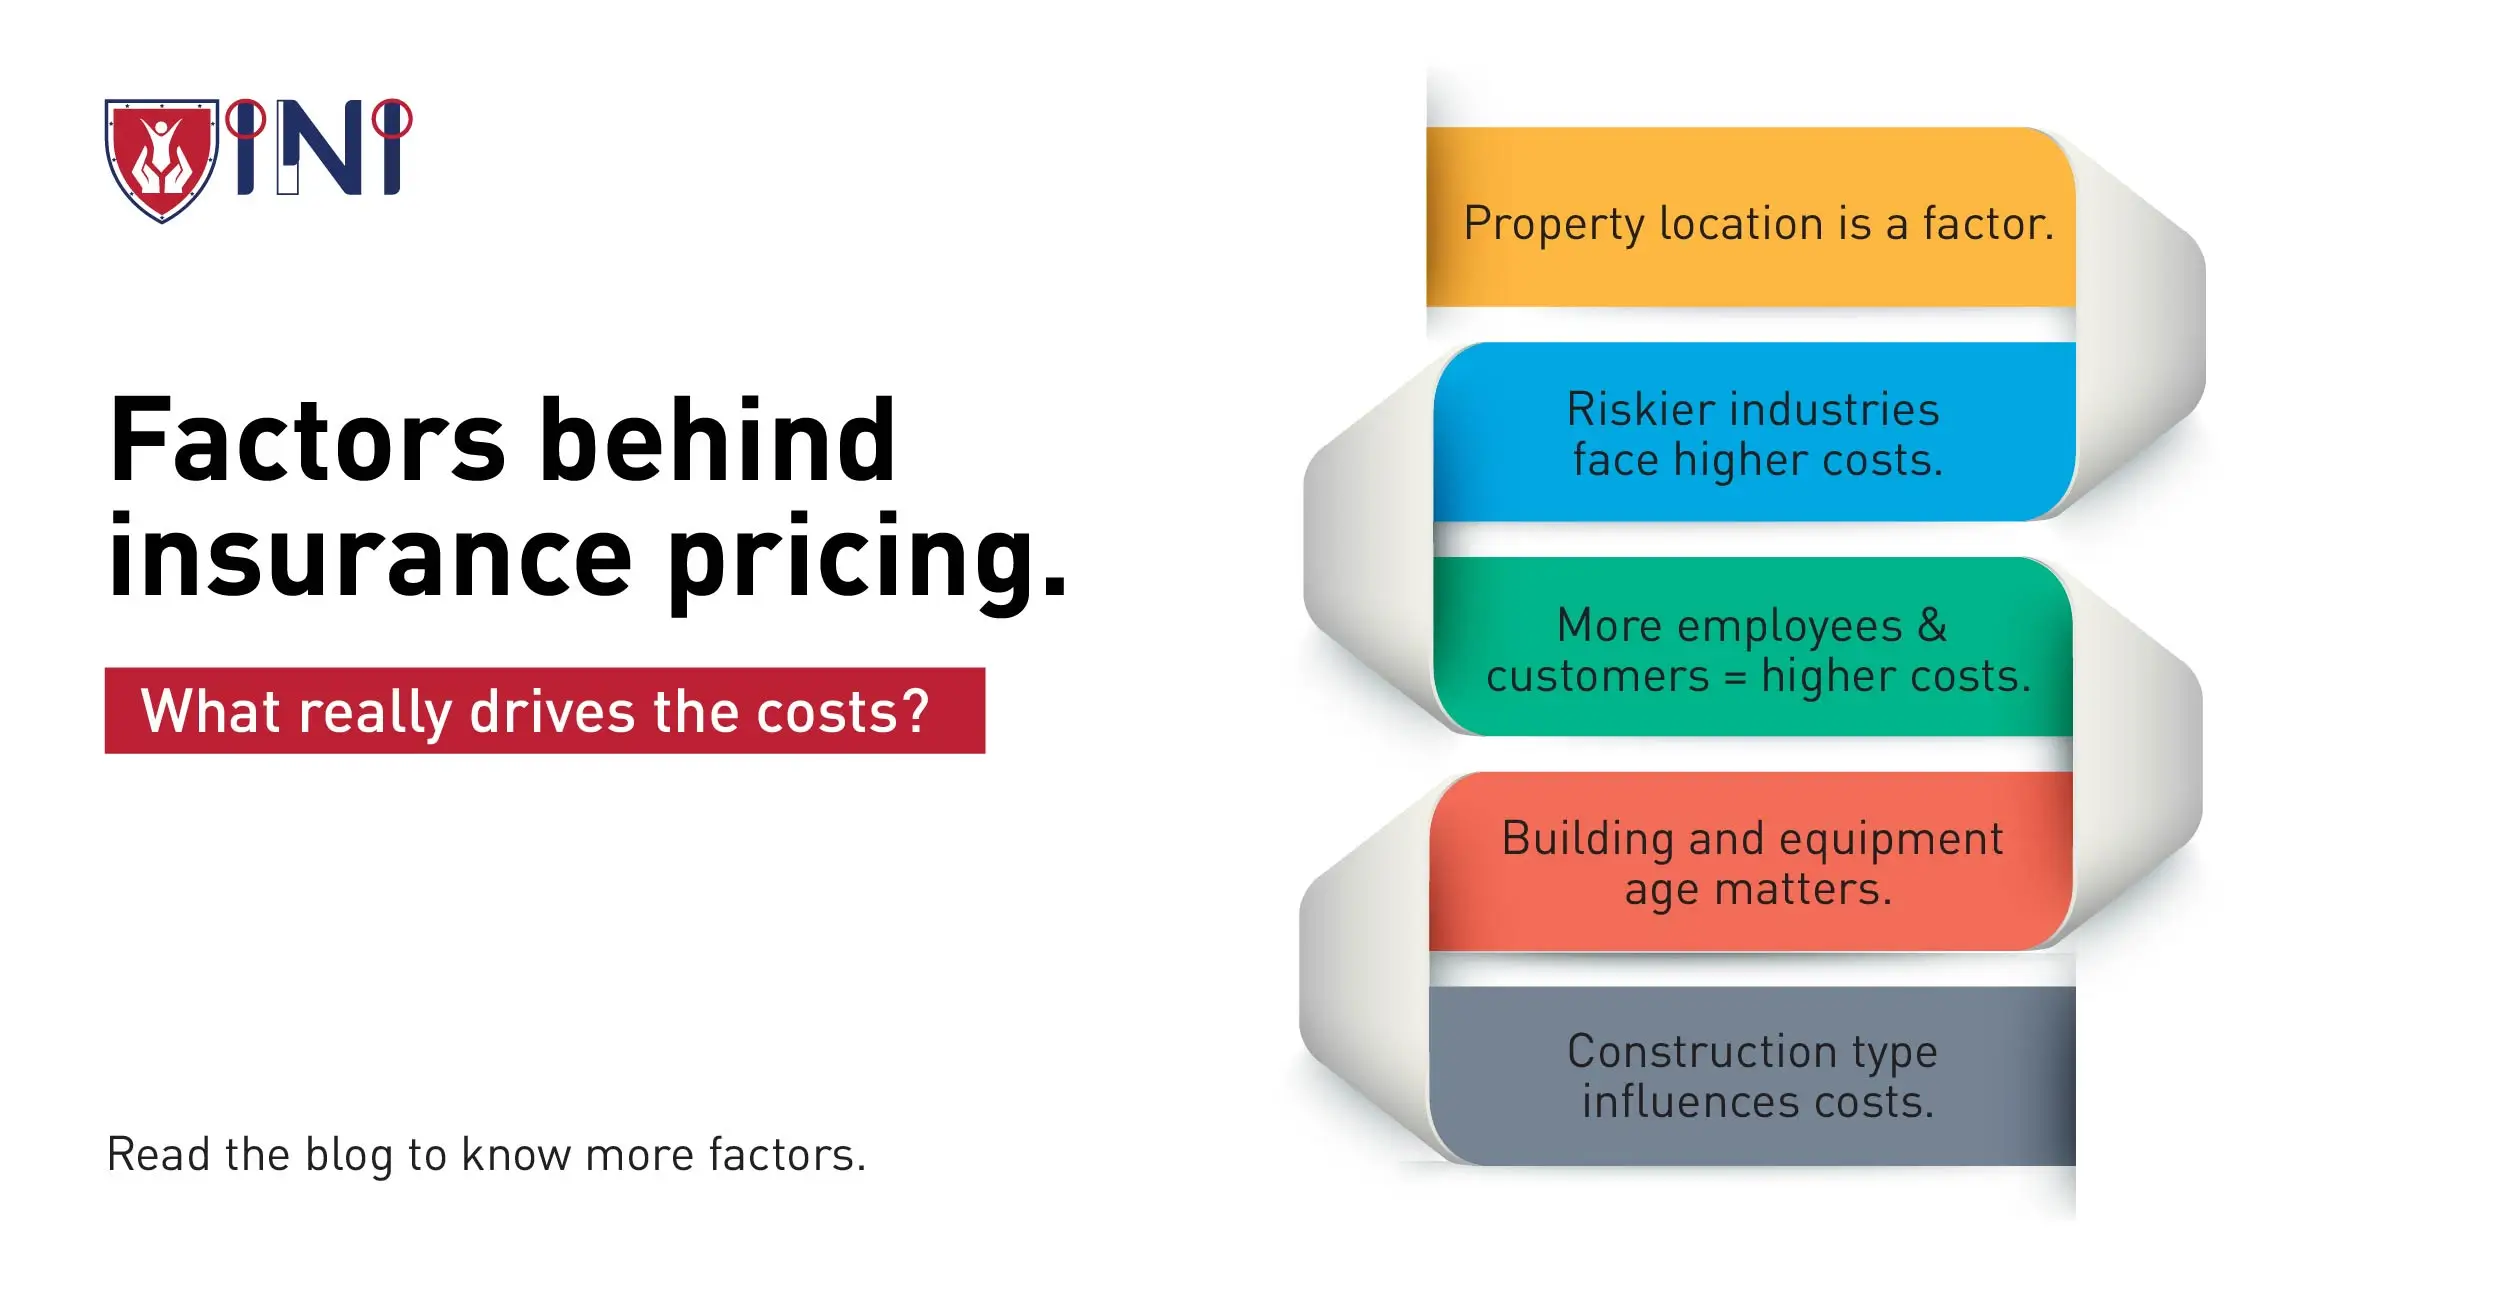 Factors behind insurance pricing